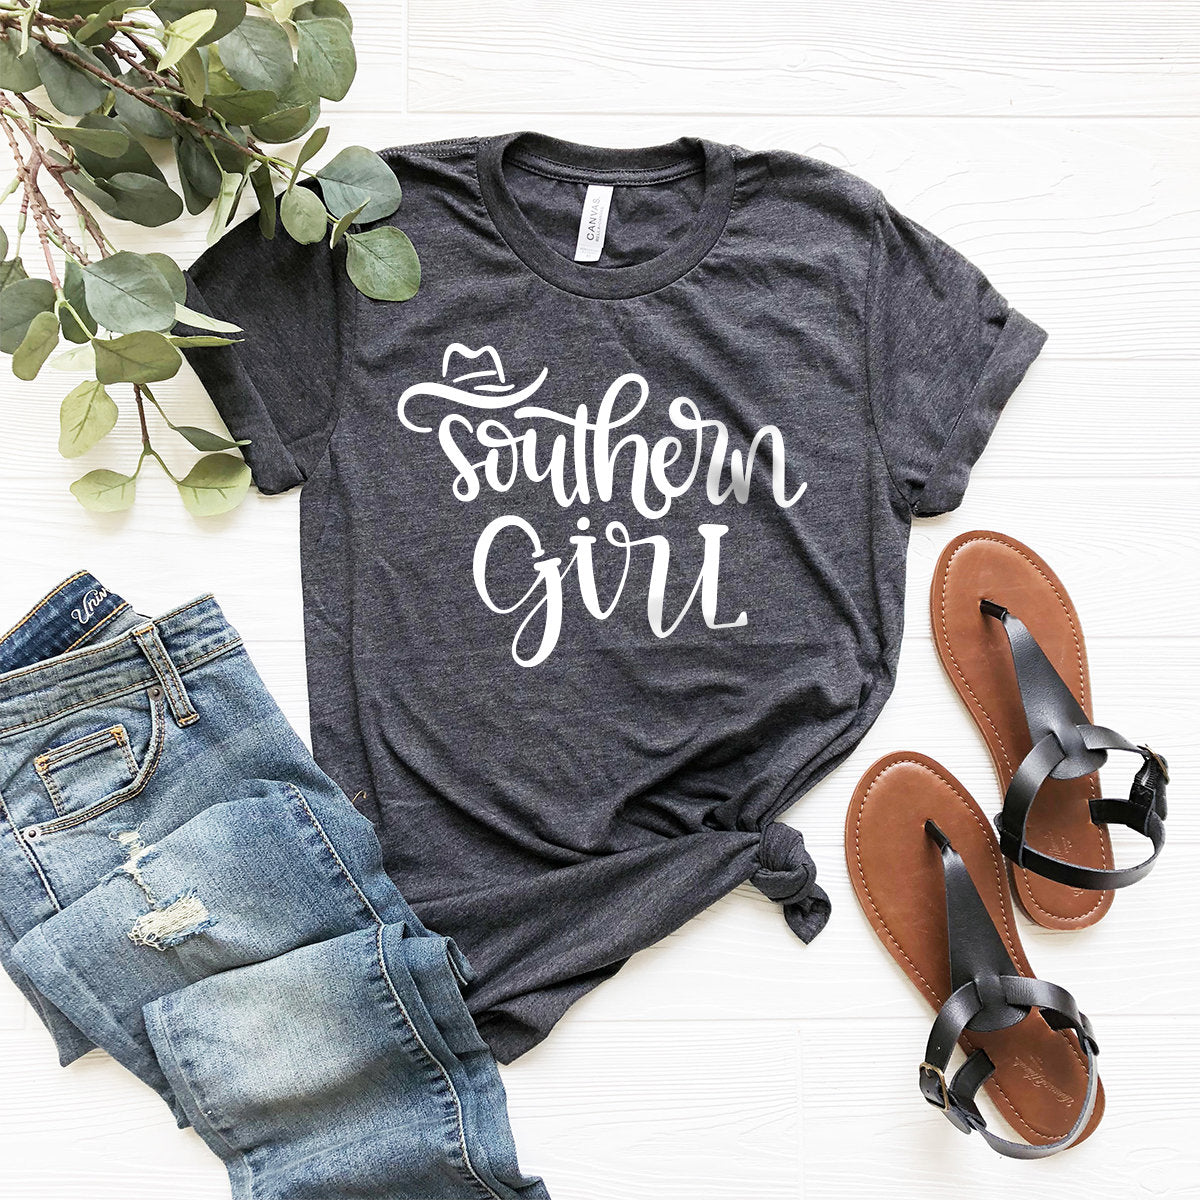 Southern Girl Shirt, Western Girl Shirt, Country Girl Shirt, Cowgirl Shirt, Southern Shirt, Southern Girl Clothing, Country T-Shirt - Fastdeliverytees.com